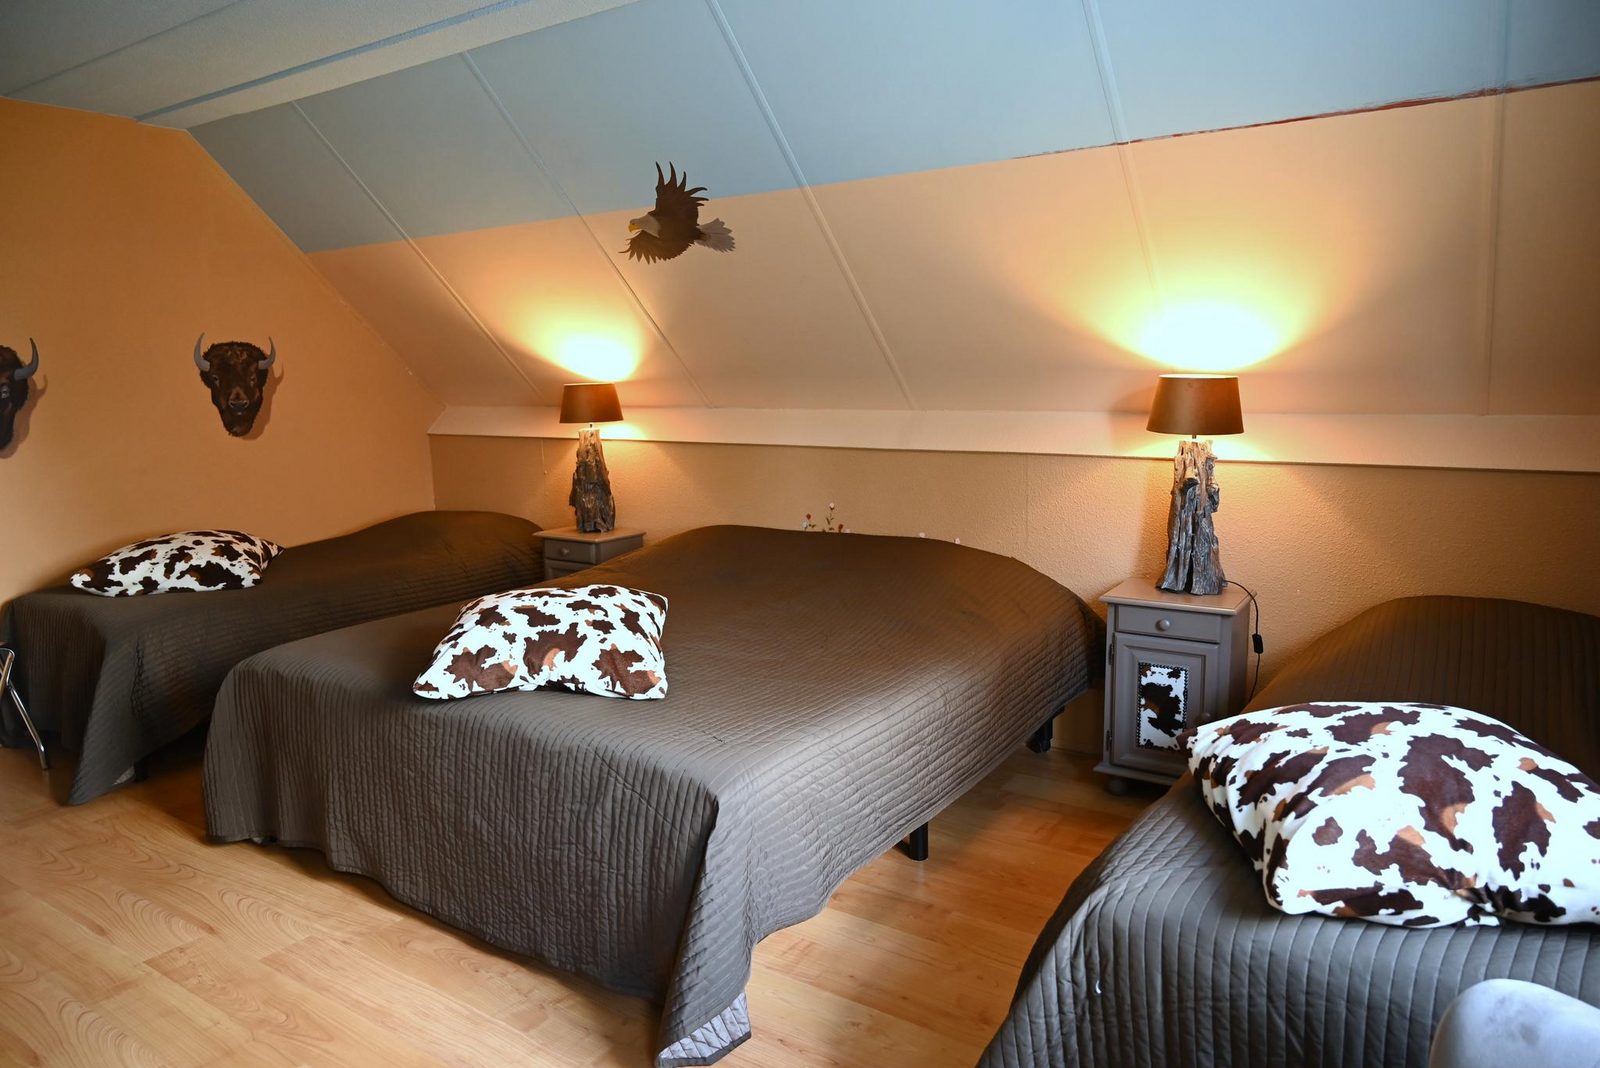 5-persoons themakamer 'Wild West' 